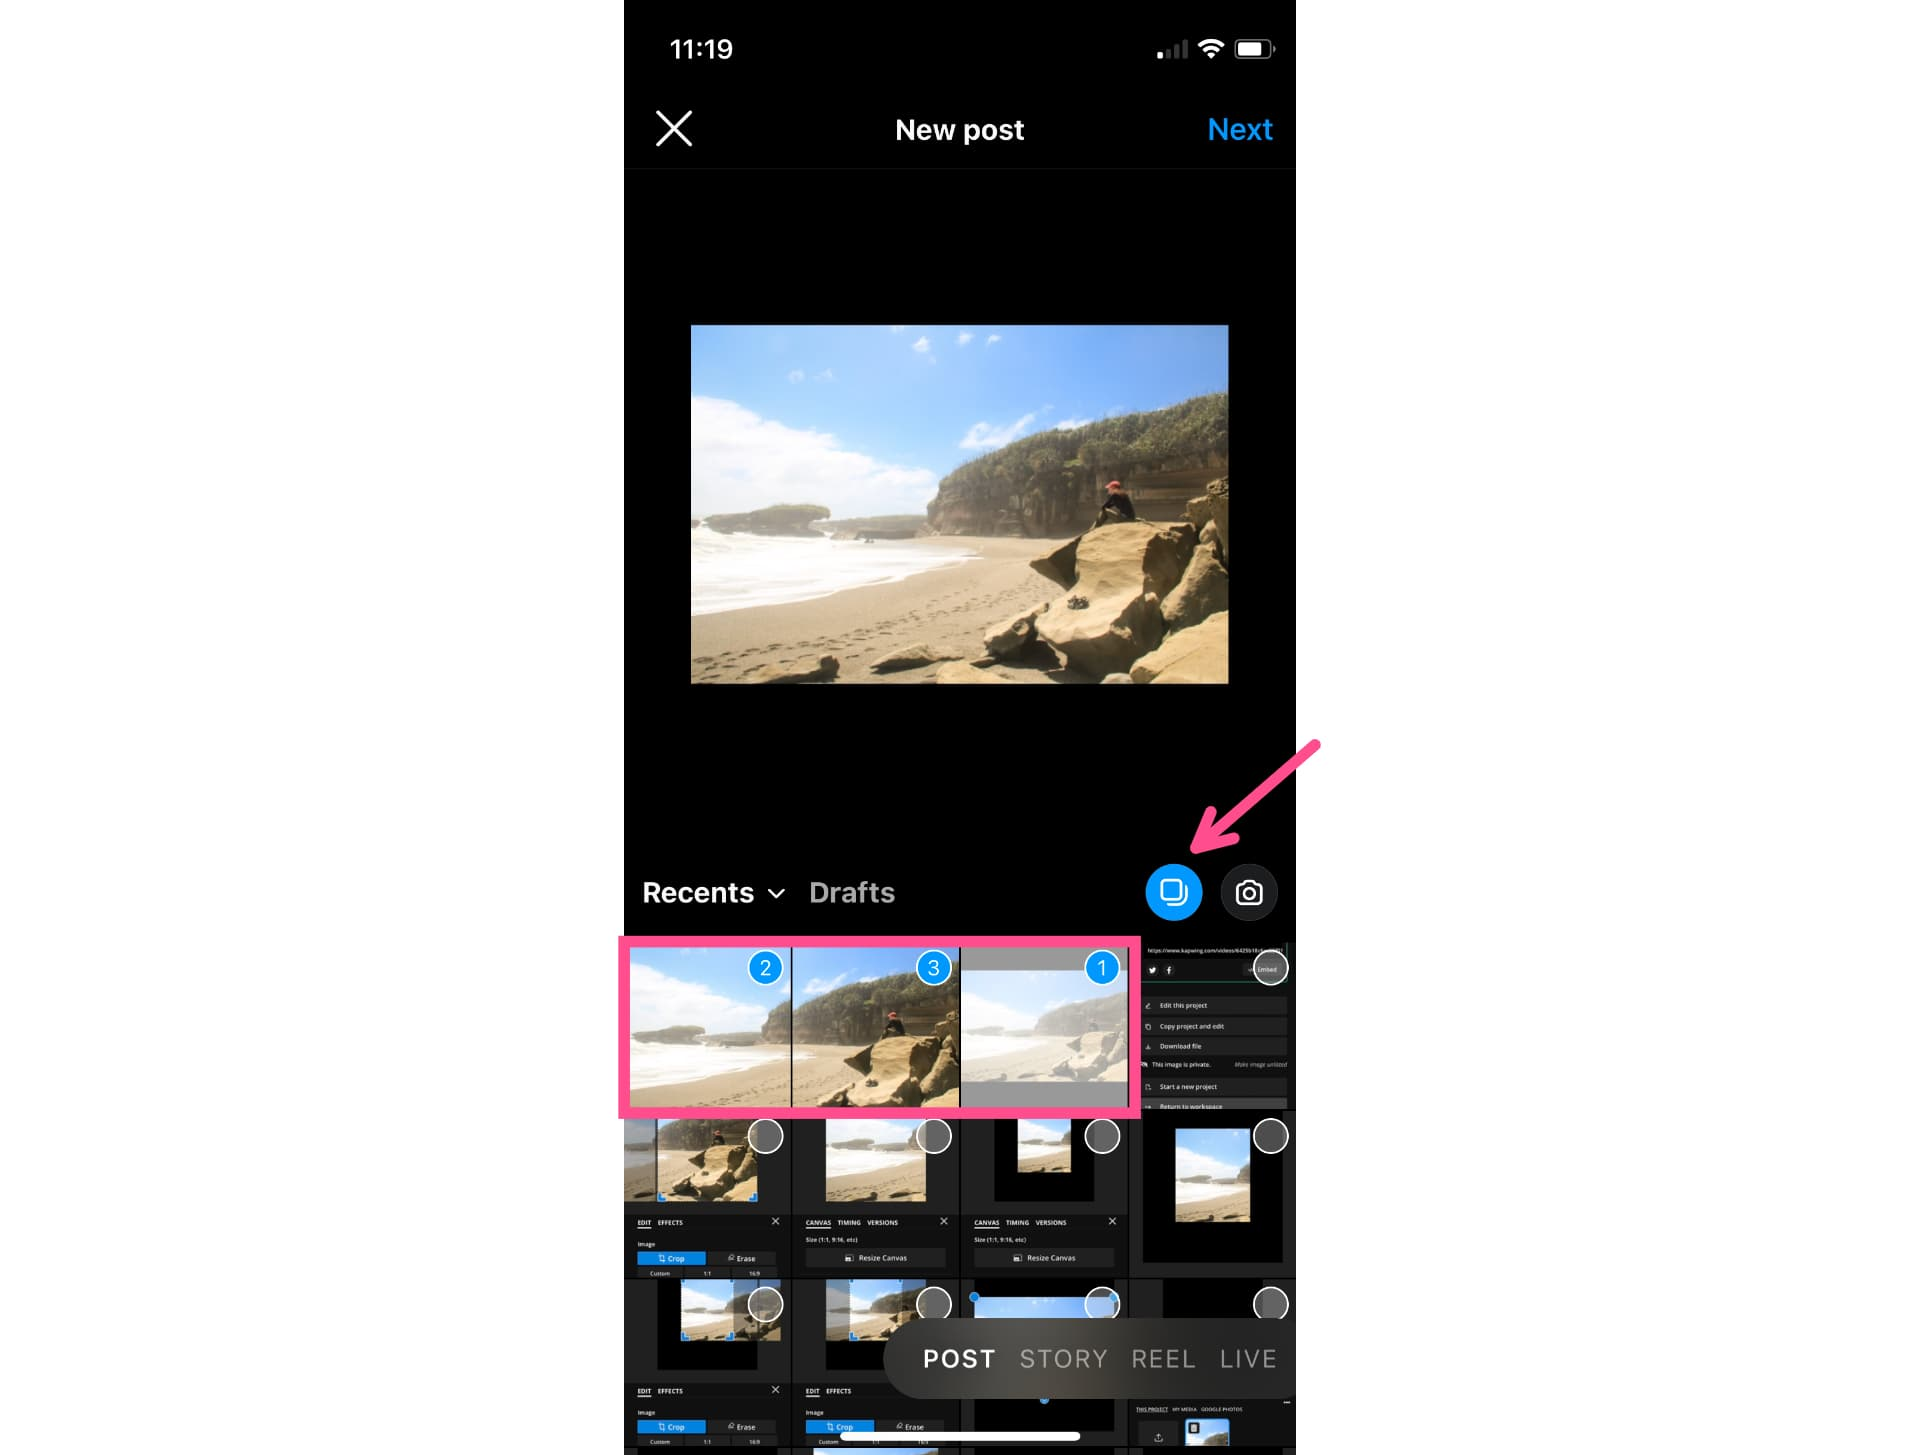 How to Post Multiple Images With Different Sizes to Instagram